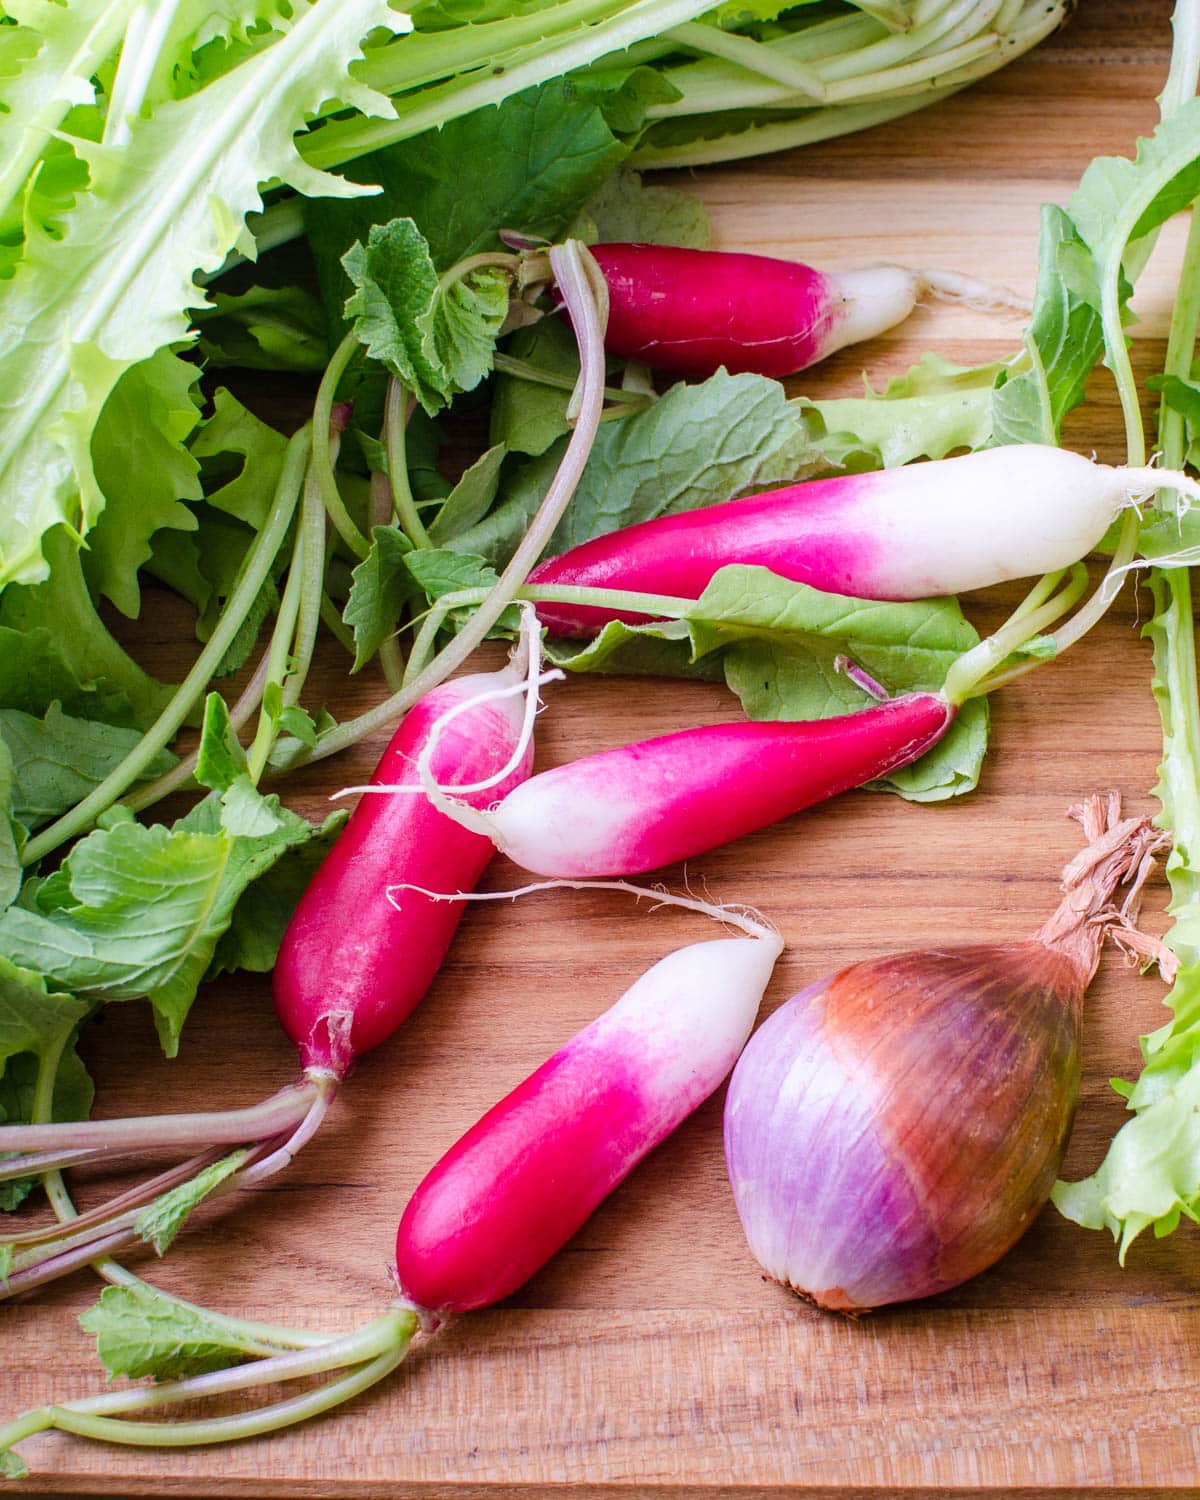 French radishes and frisee lettuce.